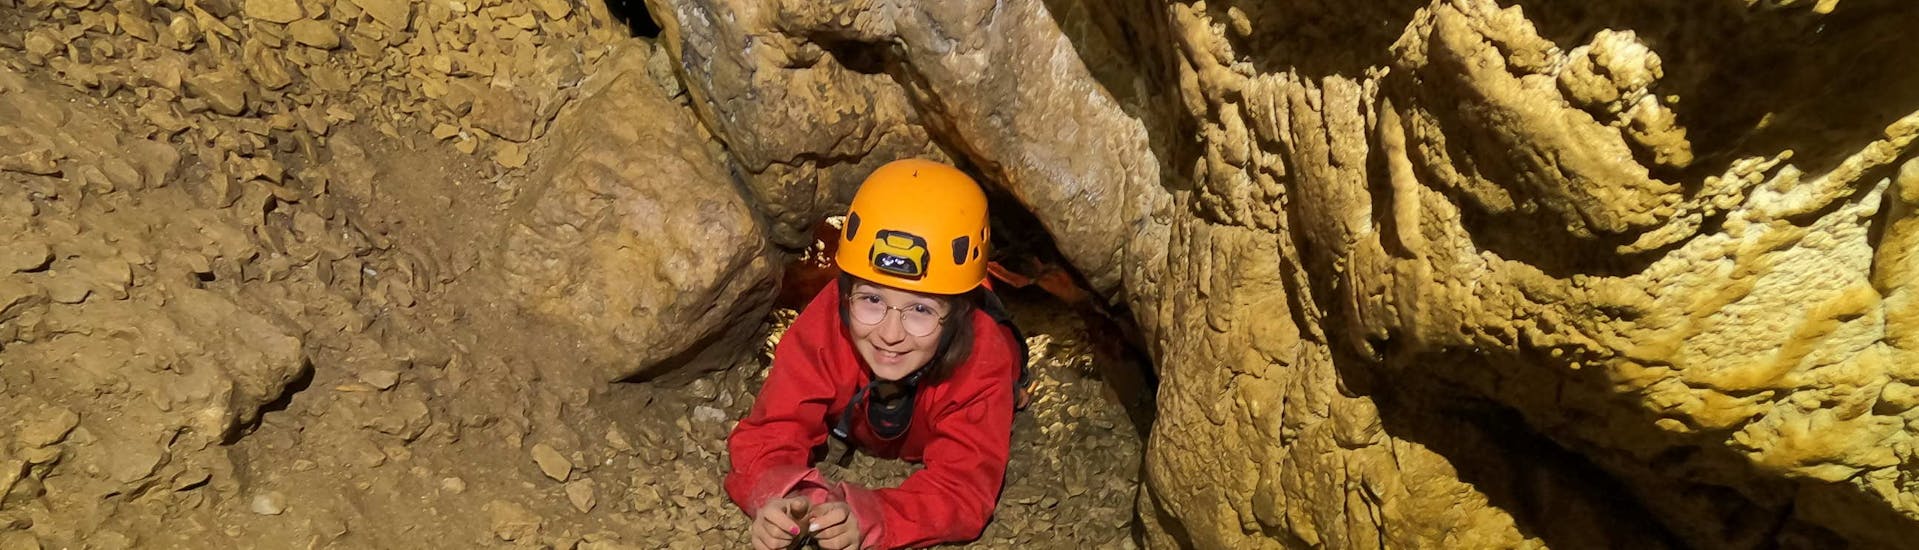 Someone is making progress in a cave during their activity of Discovery Caving in Les Deux Avens with Geo Ardèche Canyon.